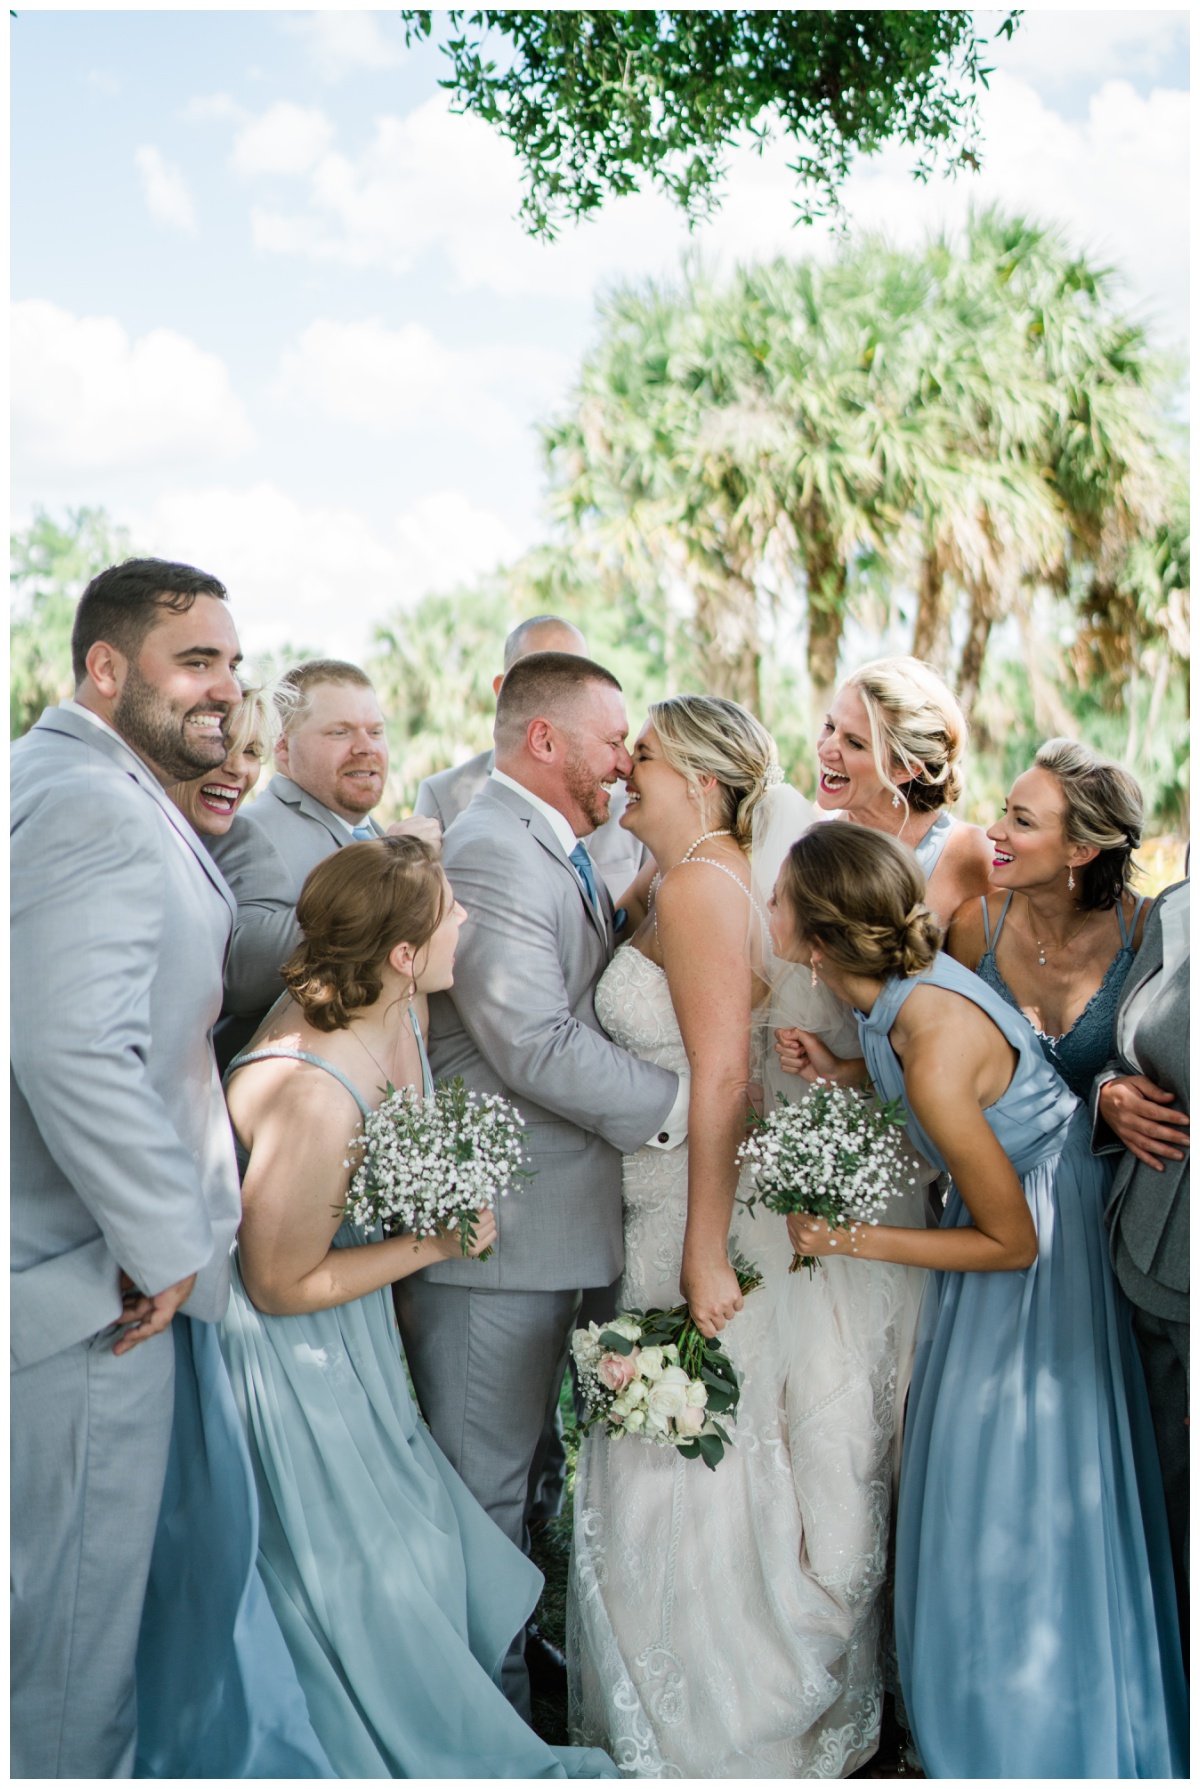 Bride and groom laugh with bridal party during White Rose Naples wedding day